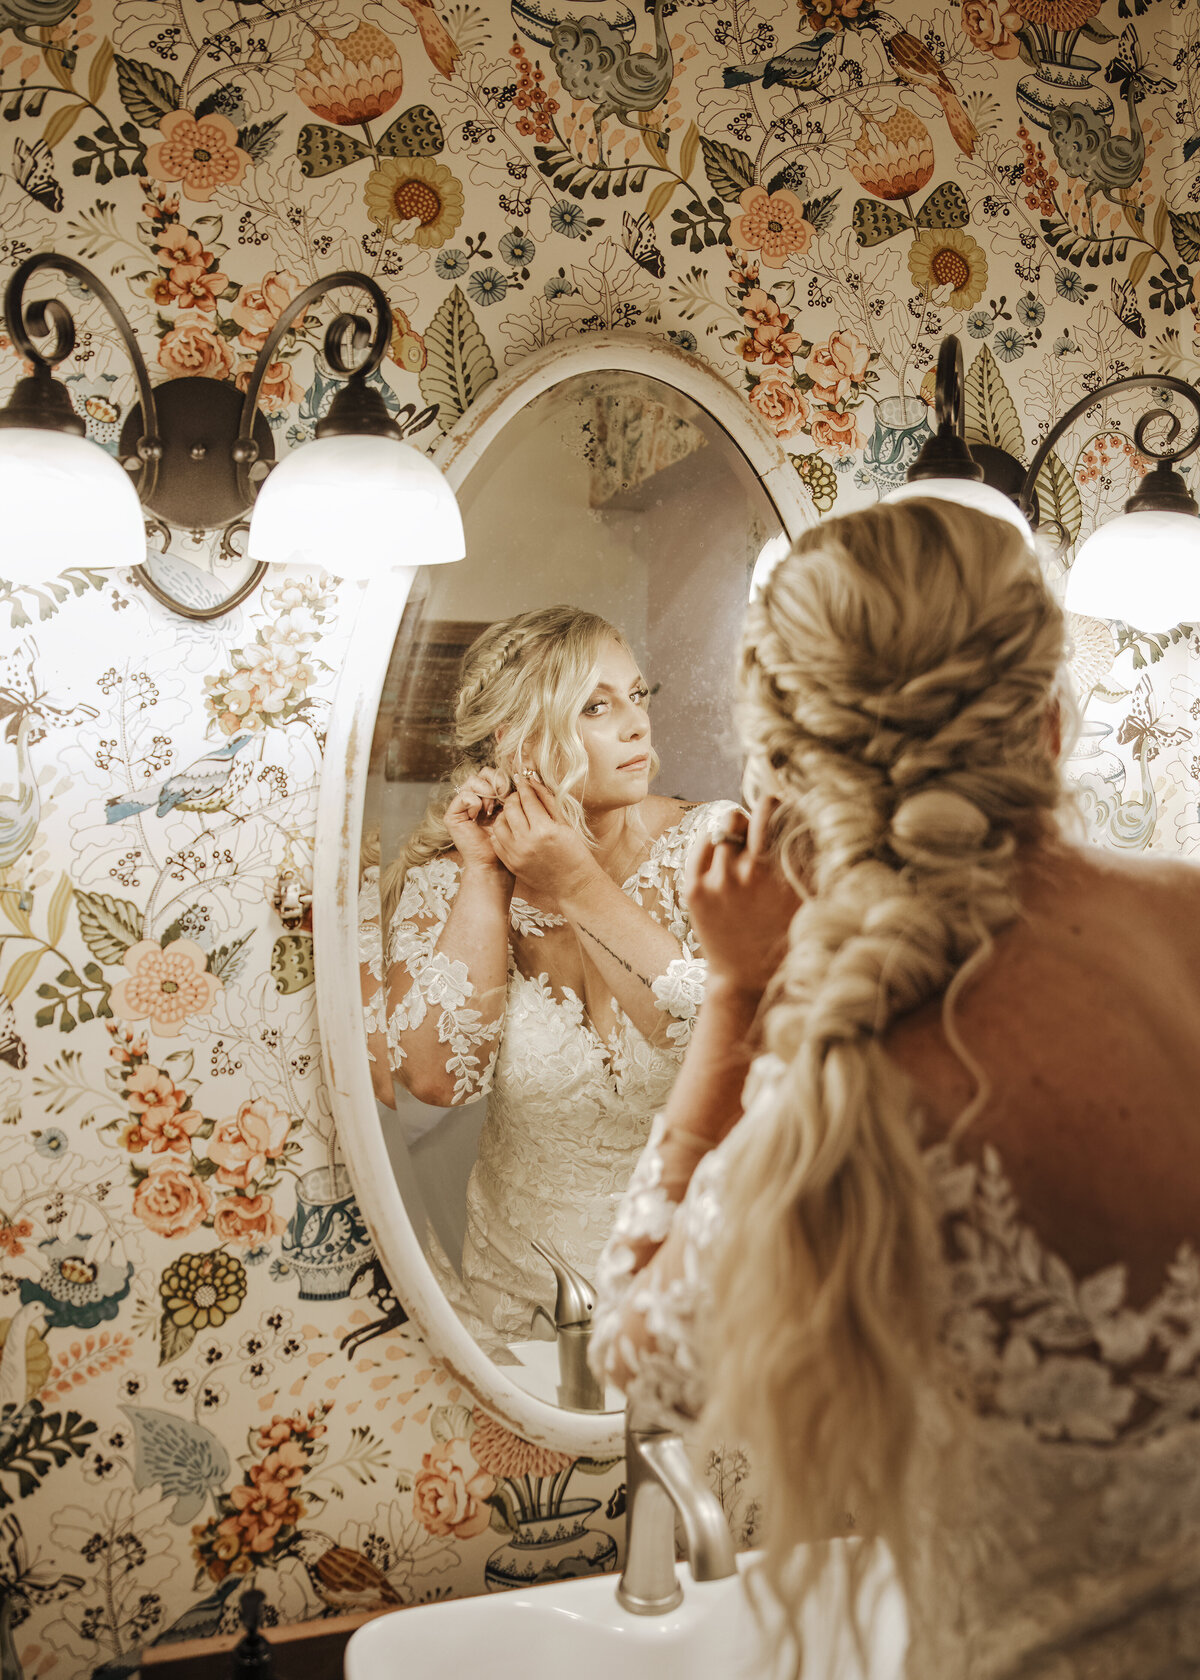 A bride in a lace gown finalizing her look in front of a mirror with ornate floral wallpaper in the background taken by jen Jarmuzek photography a Minneapolis wedding photographer